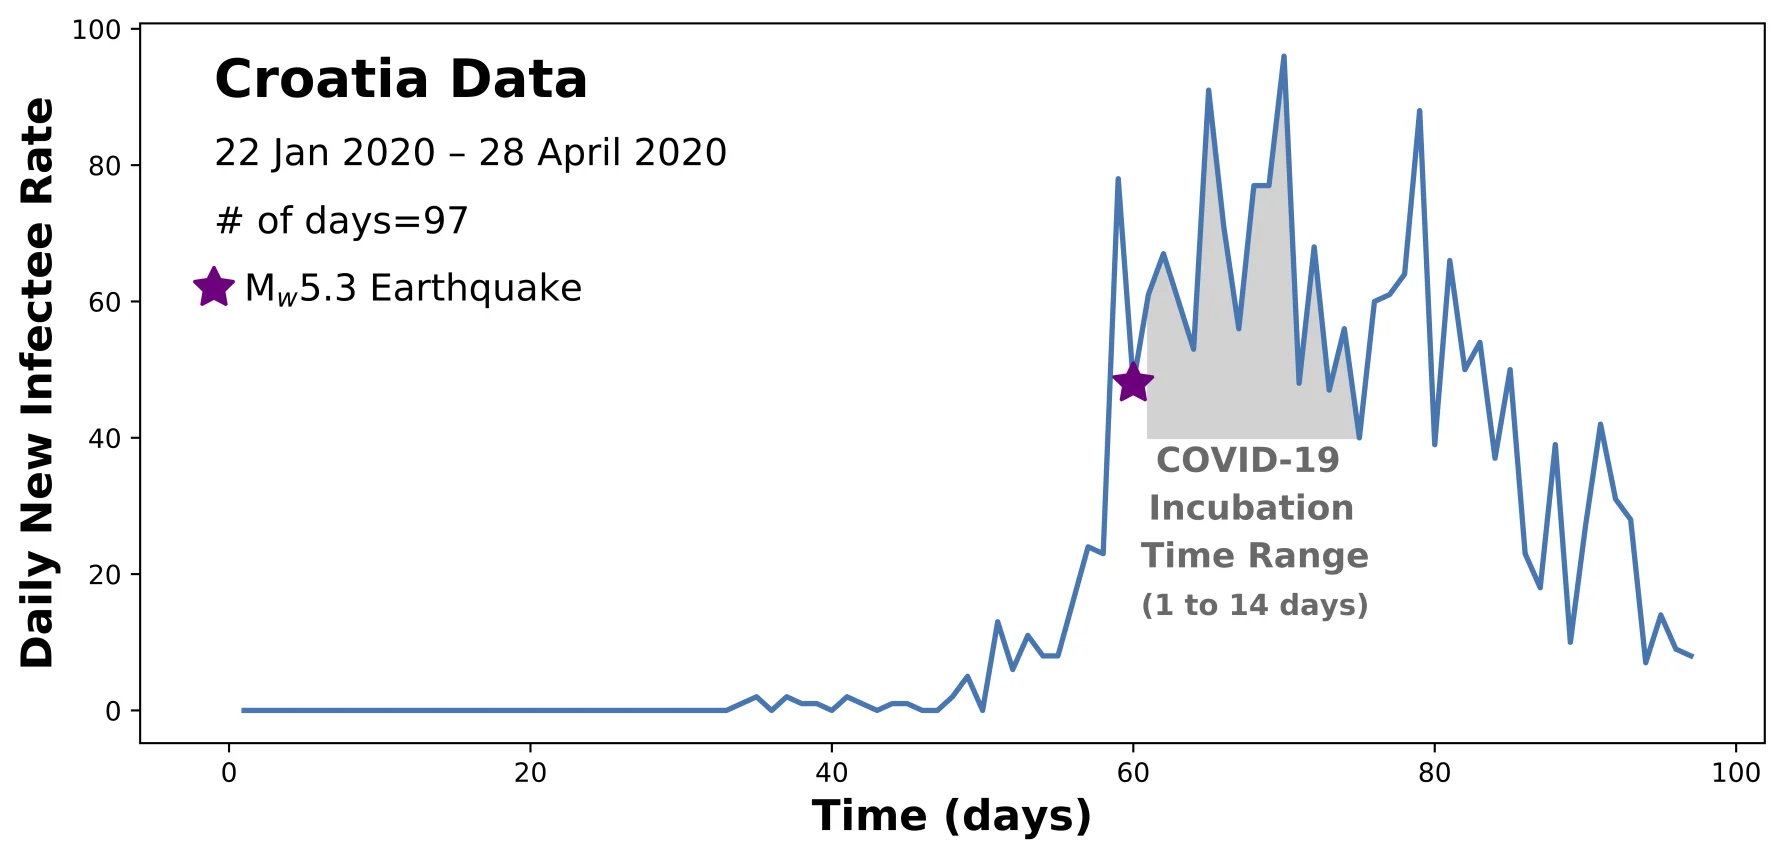 A graph on COVID-19 infections in Croatia